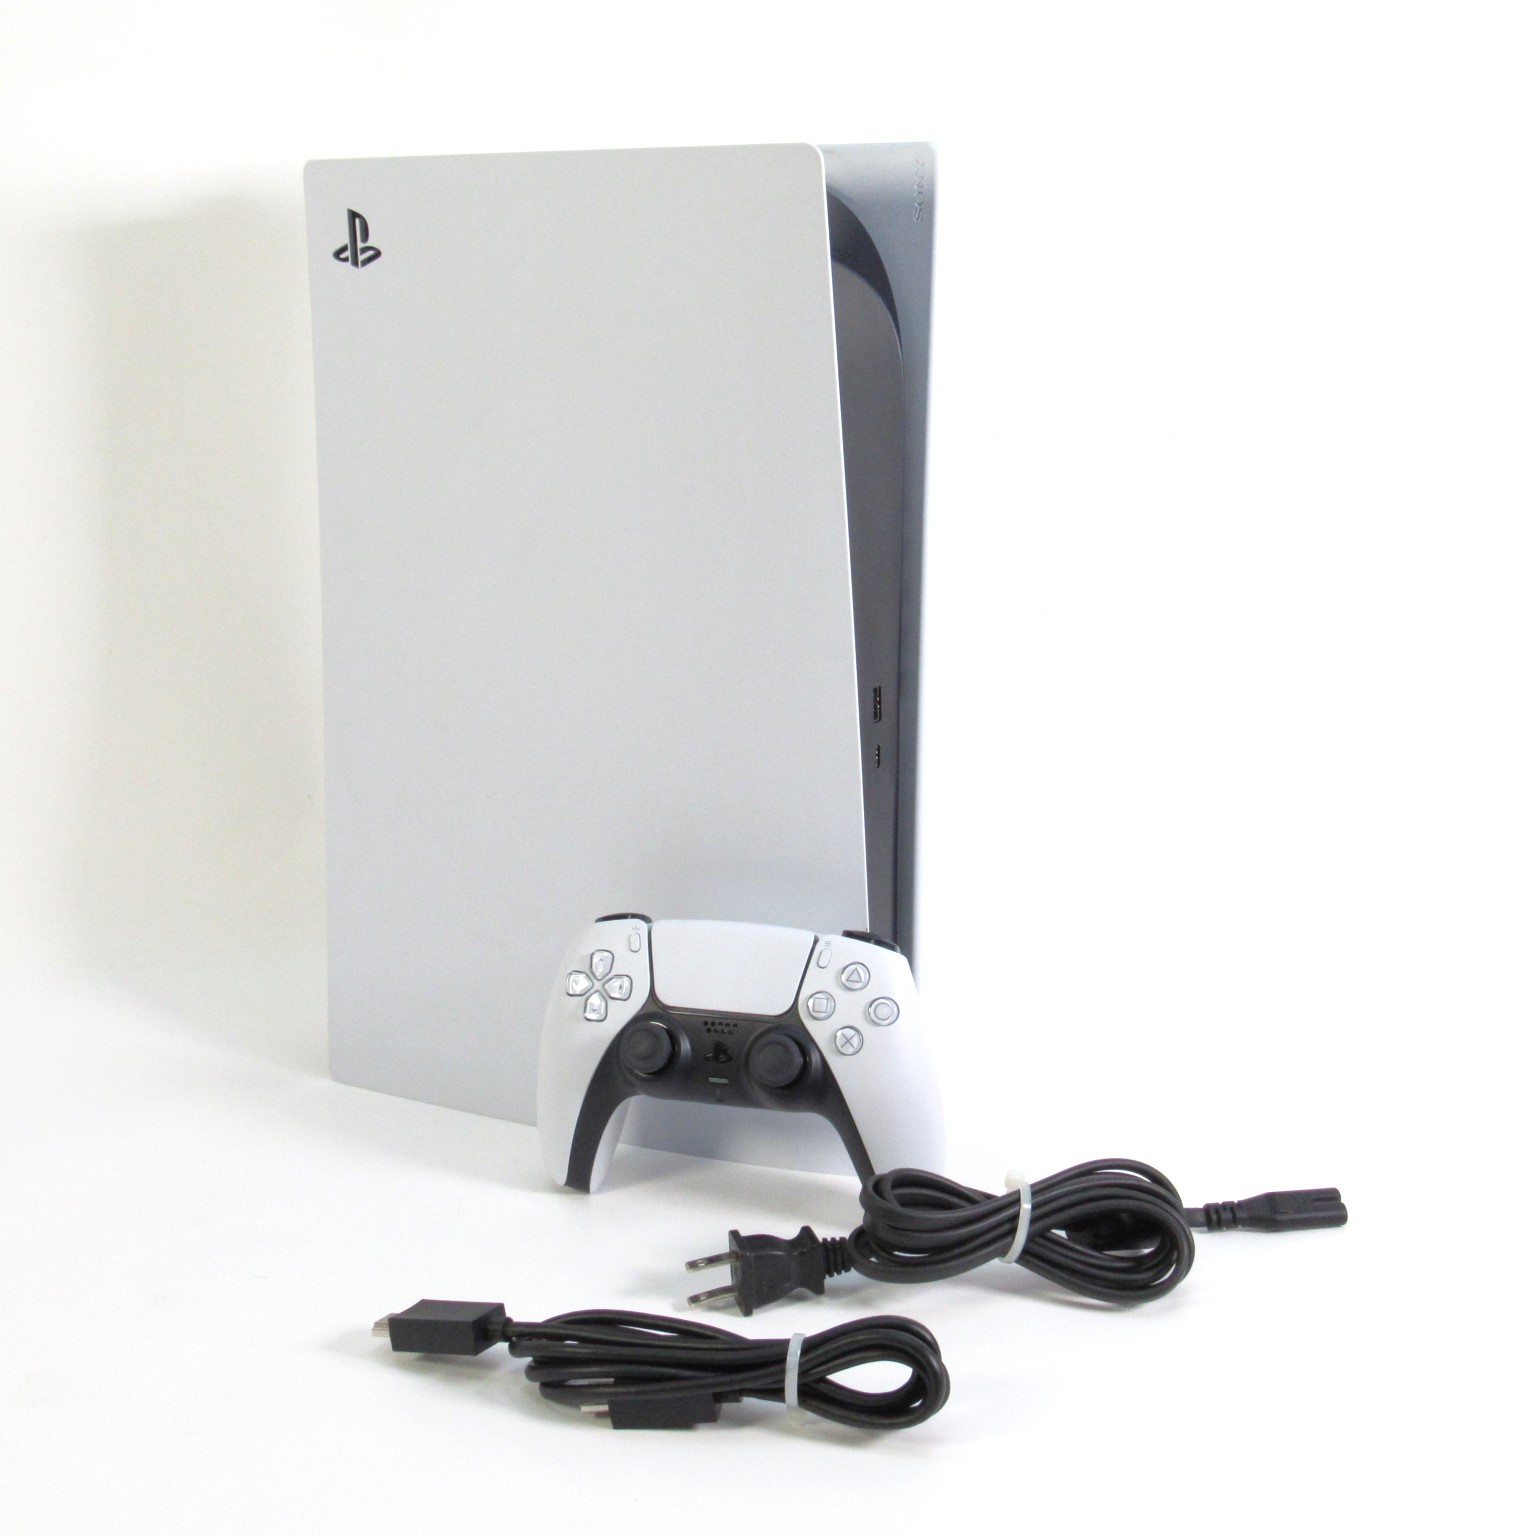 Consola Play Station 5 - Standard Edition, PS5, 825GB - CFI-1115A